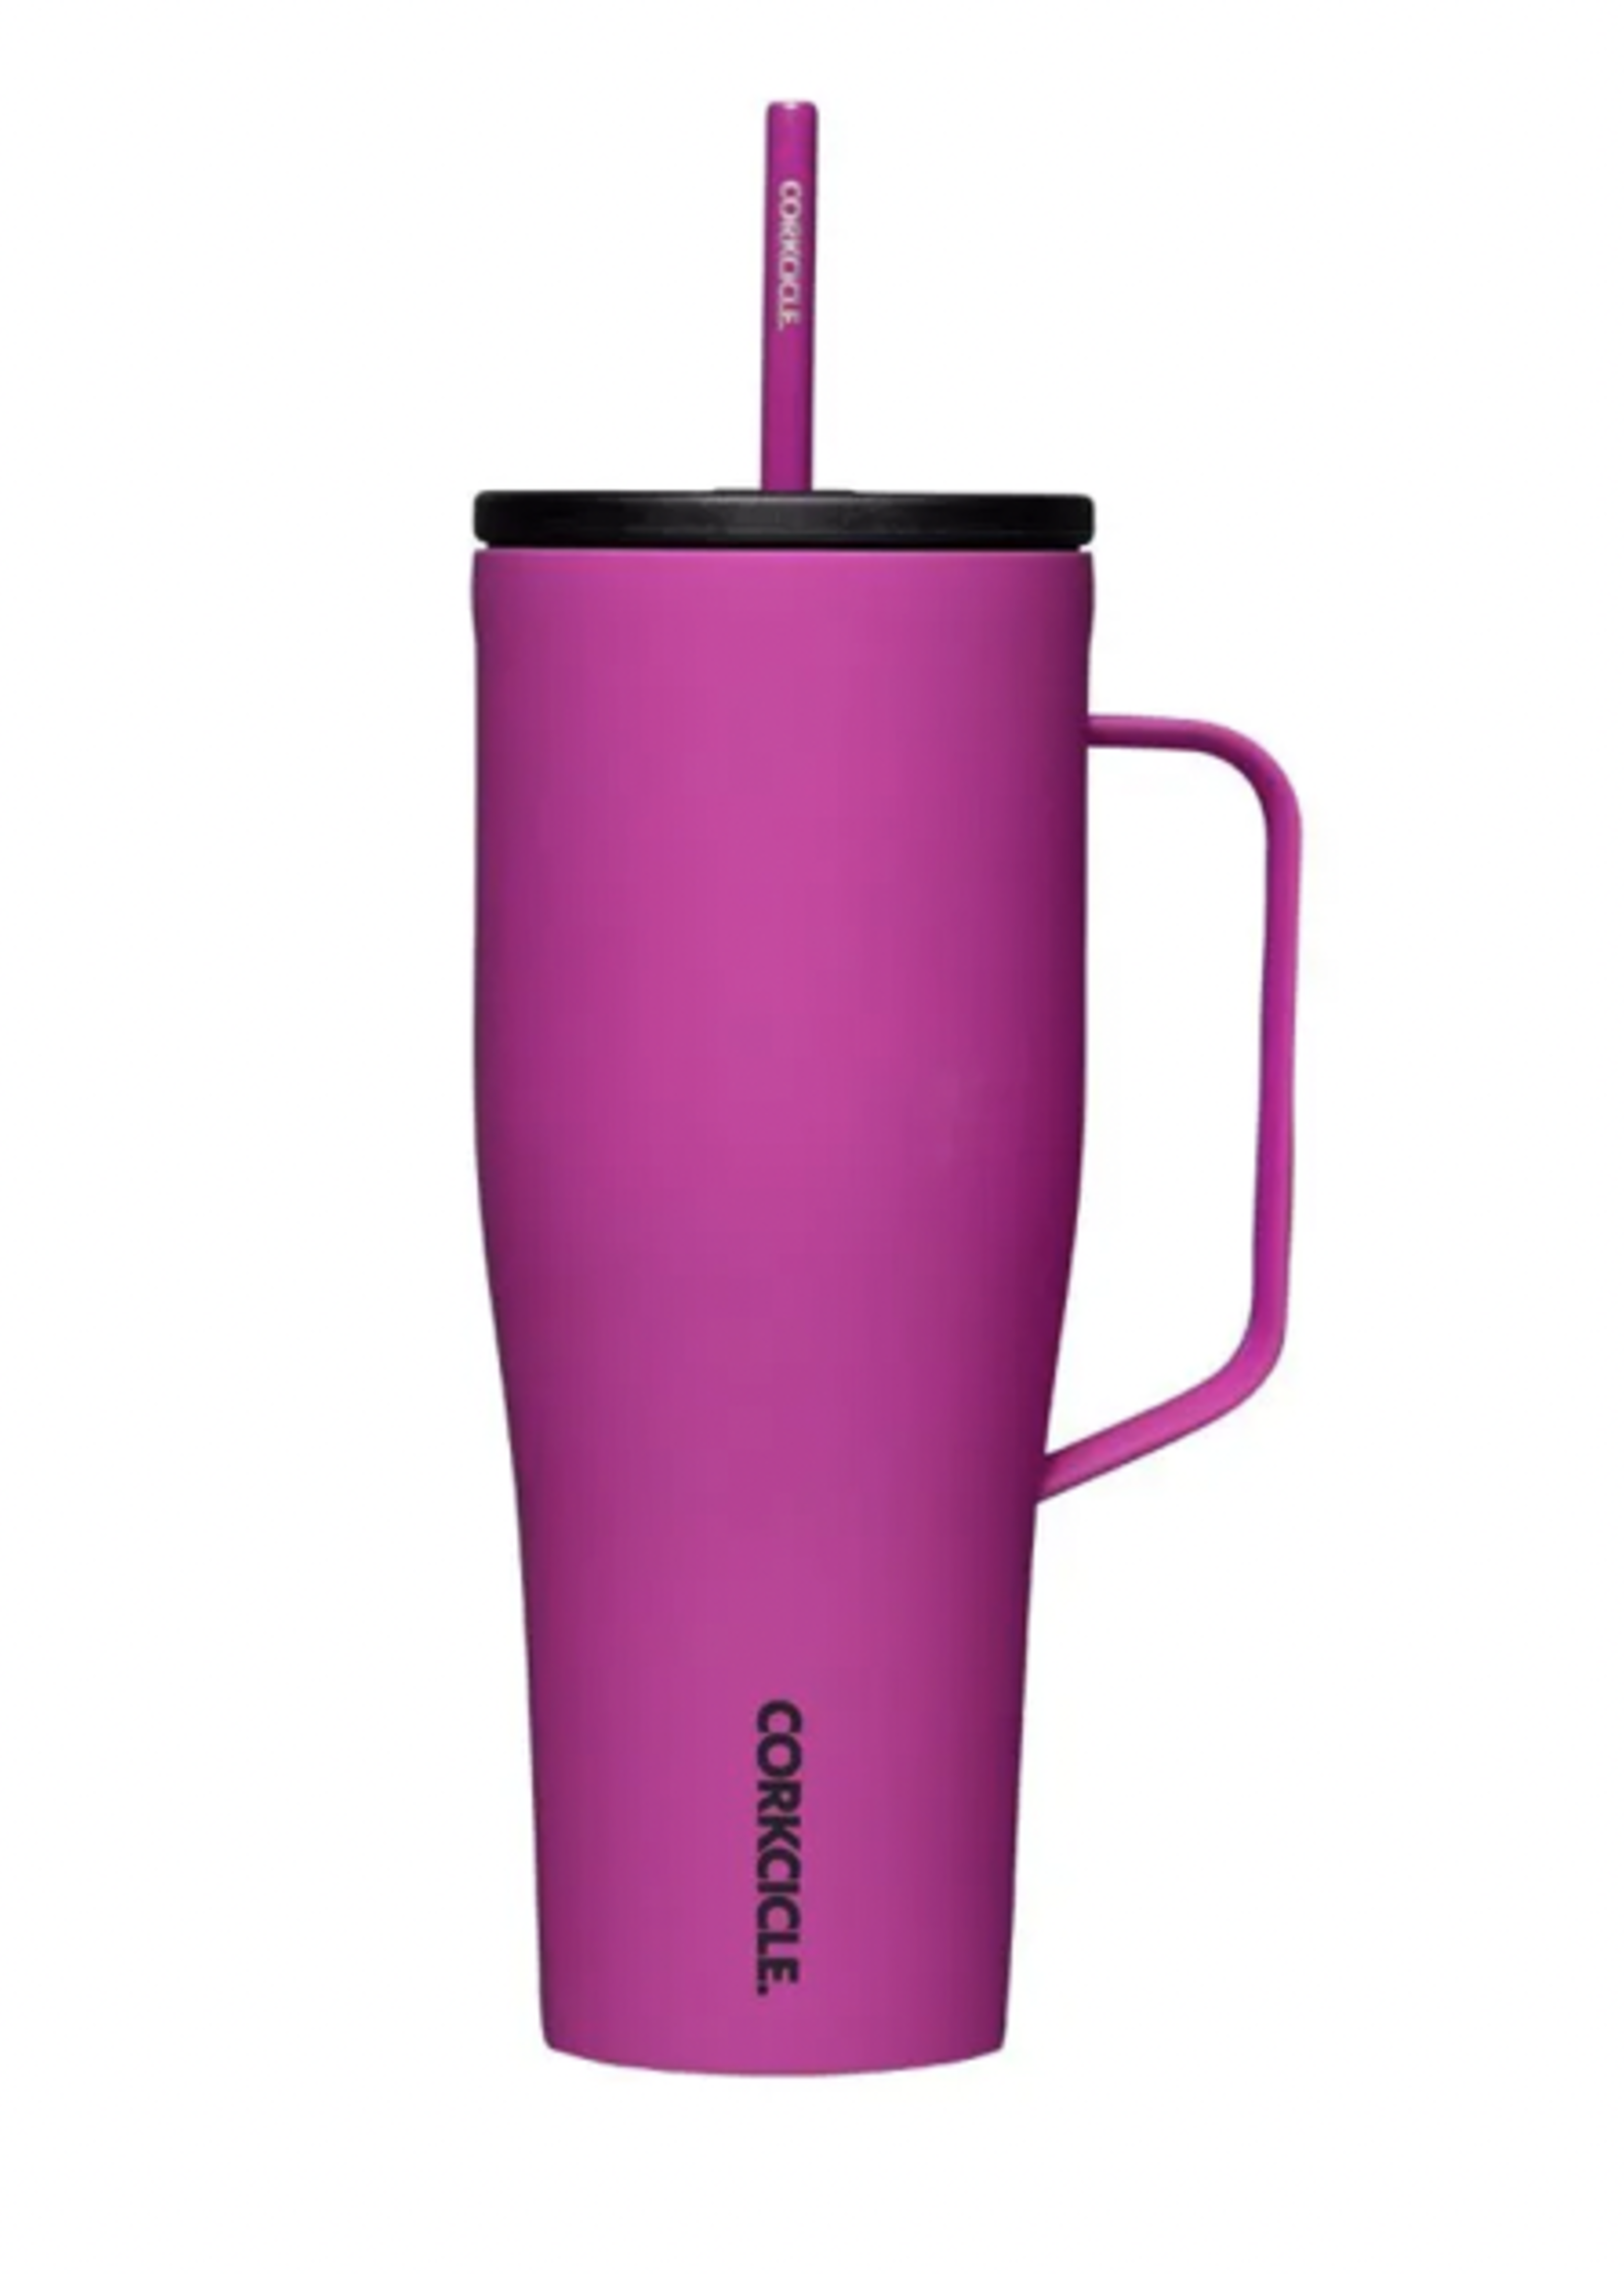 Corkcicle Cold Cup XL - Berry Punch